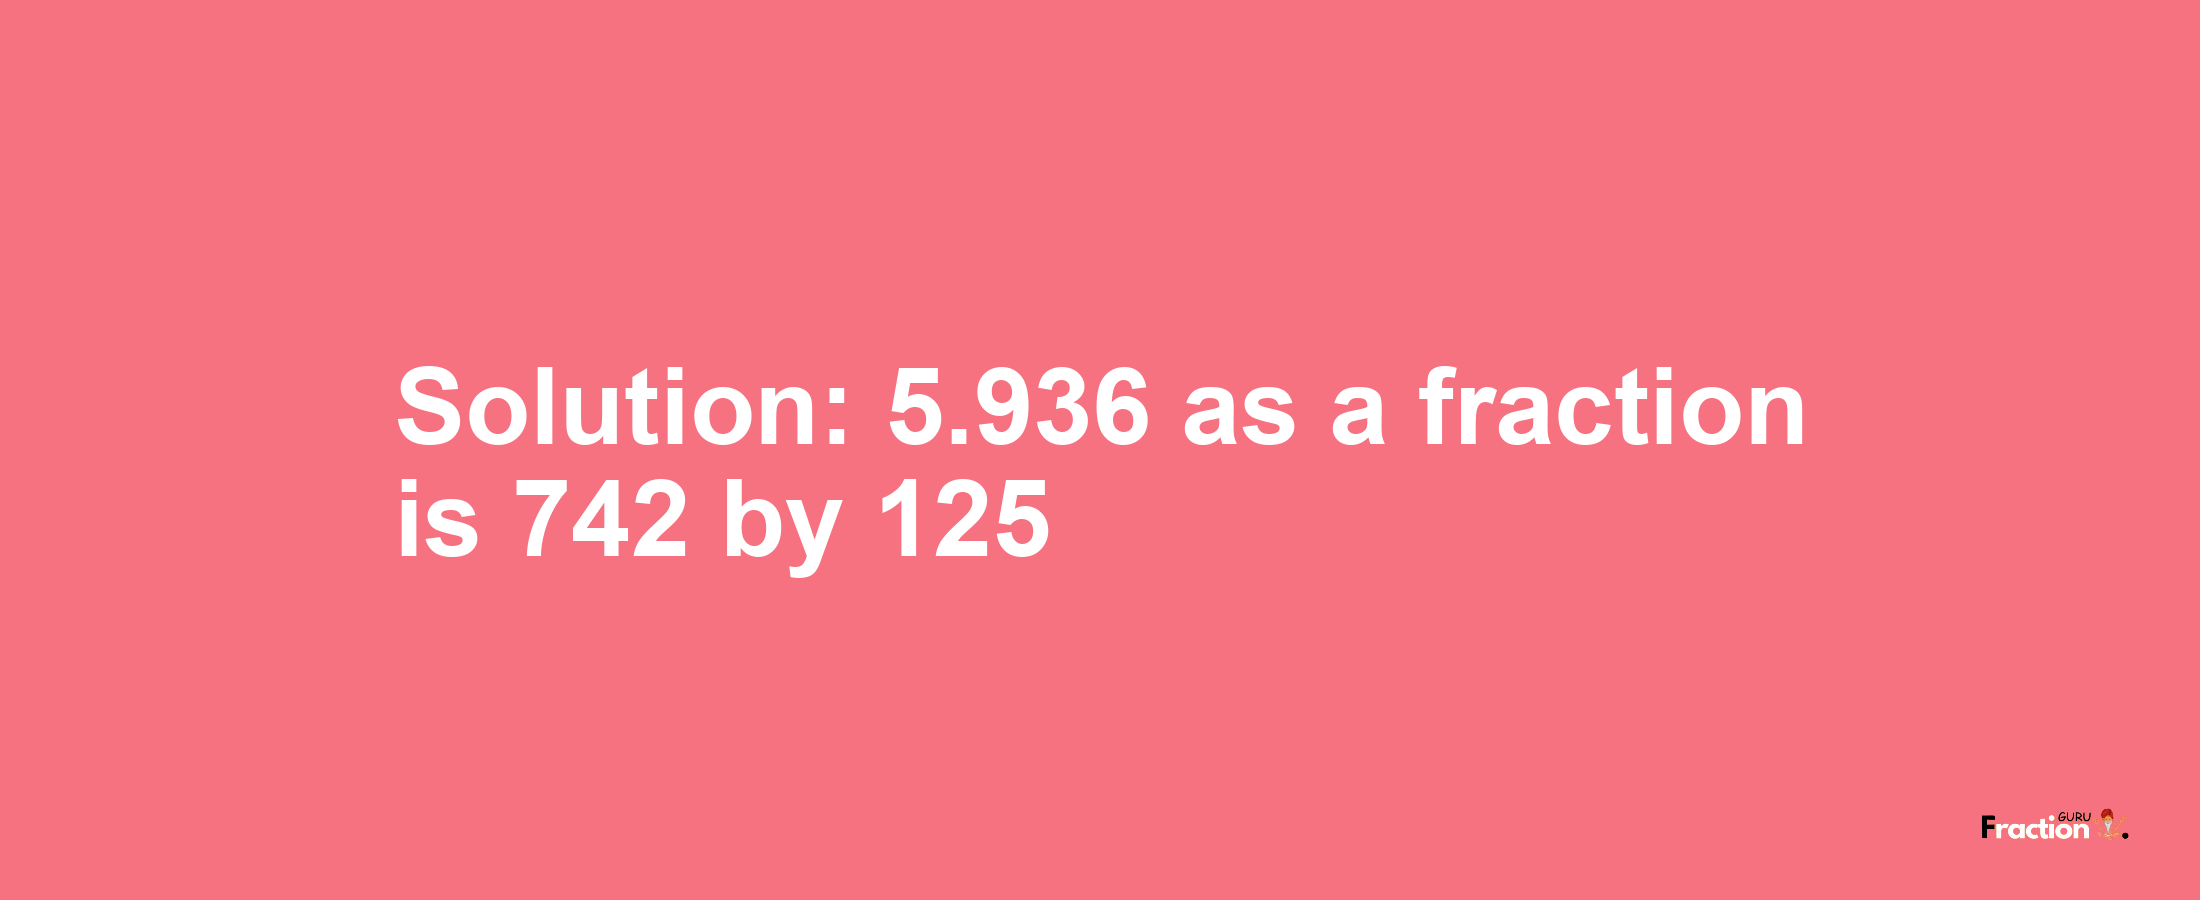 Solution:5.936 as a fraction is 742/125